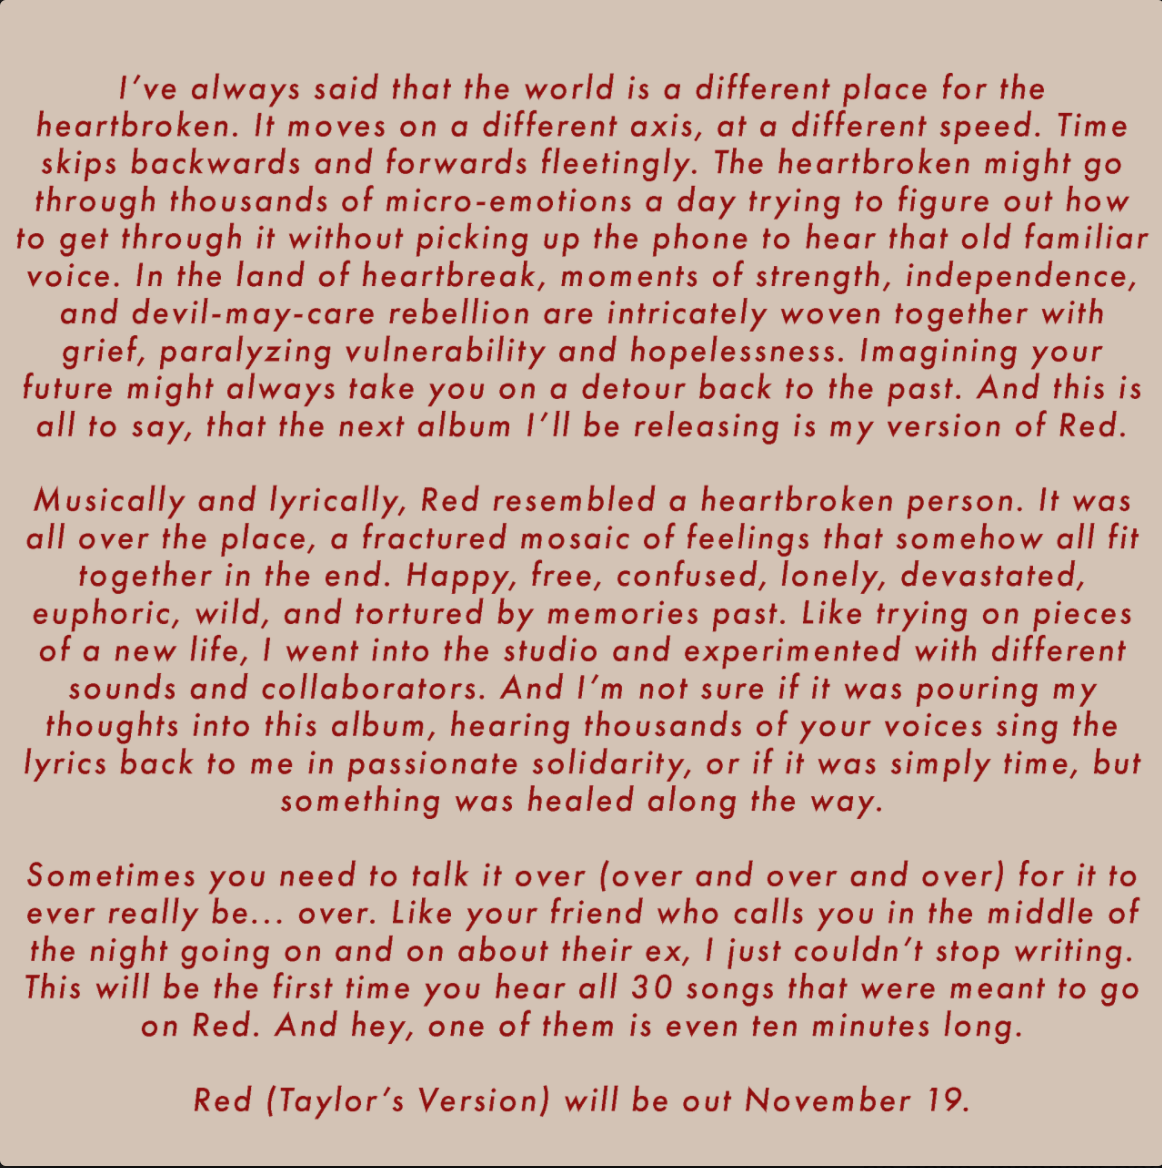 Taylor Swift's announcement of "Red Taylor's Version" 